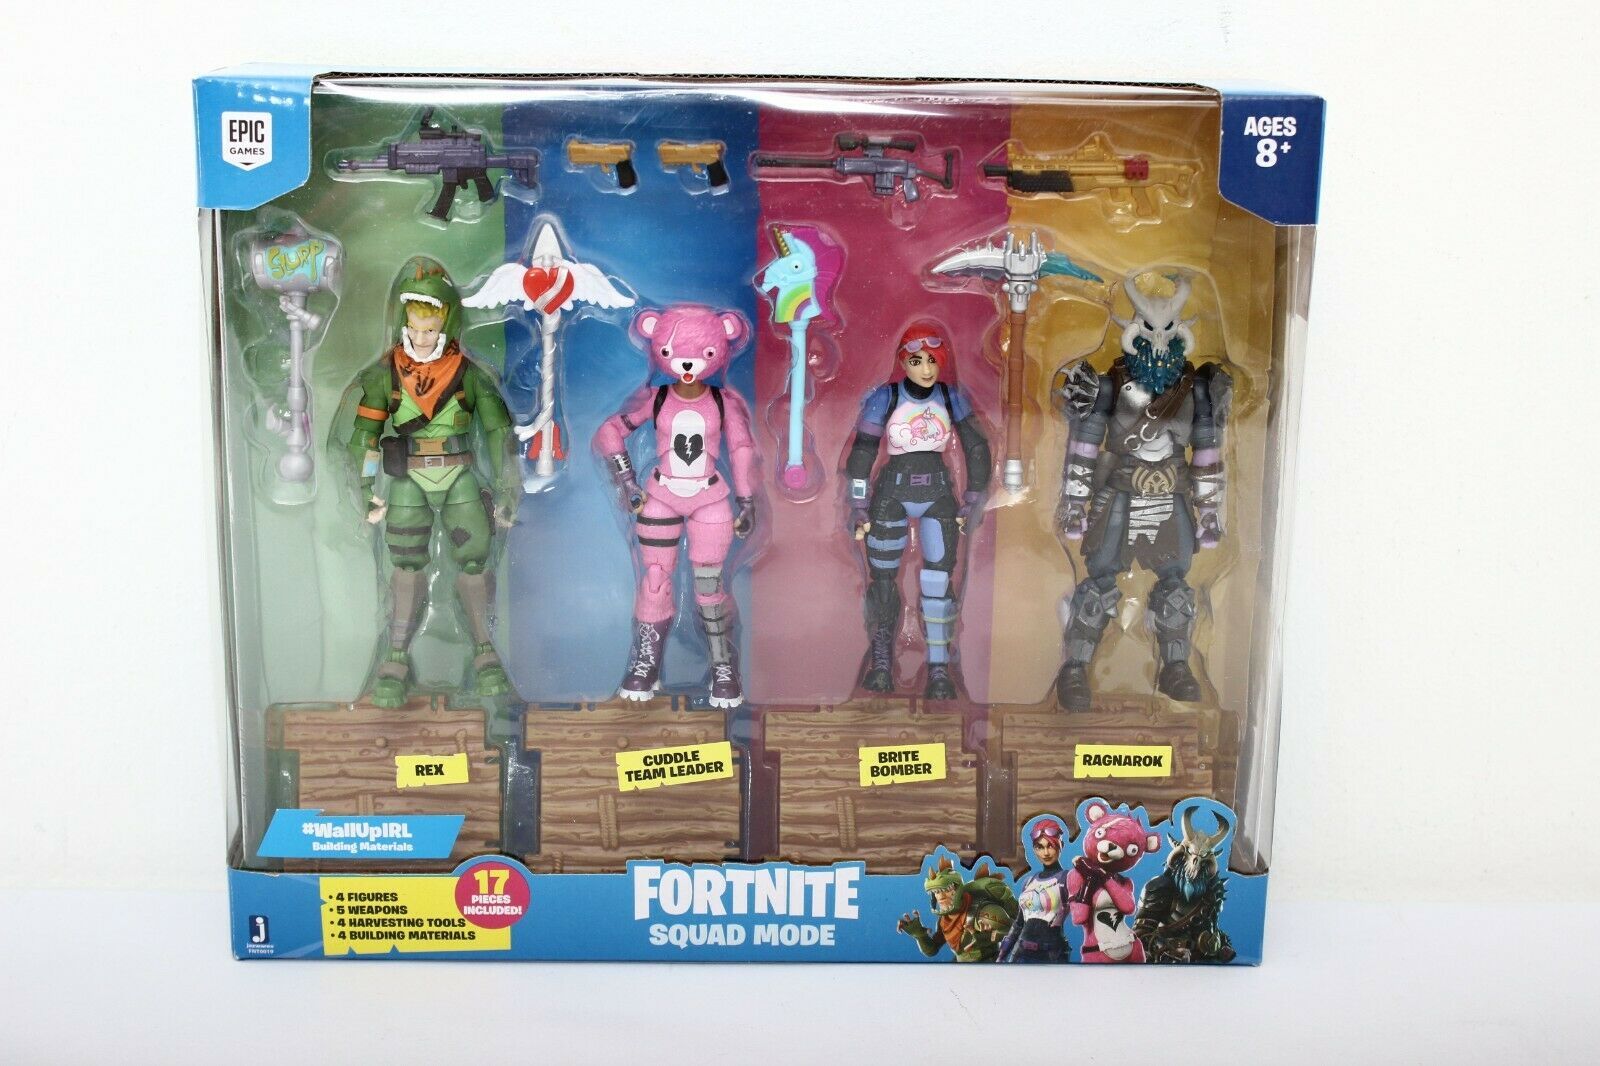 LEGENDARY B Rifle Fortnite Collectible Loot Chest for 4” Figures Factory Sealed 